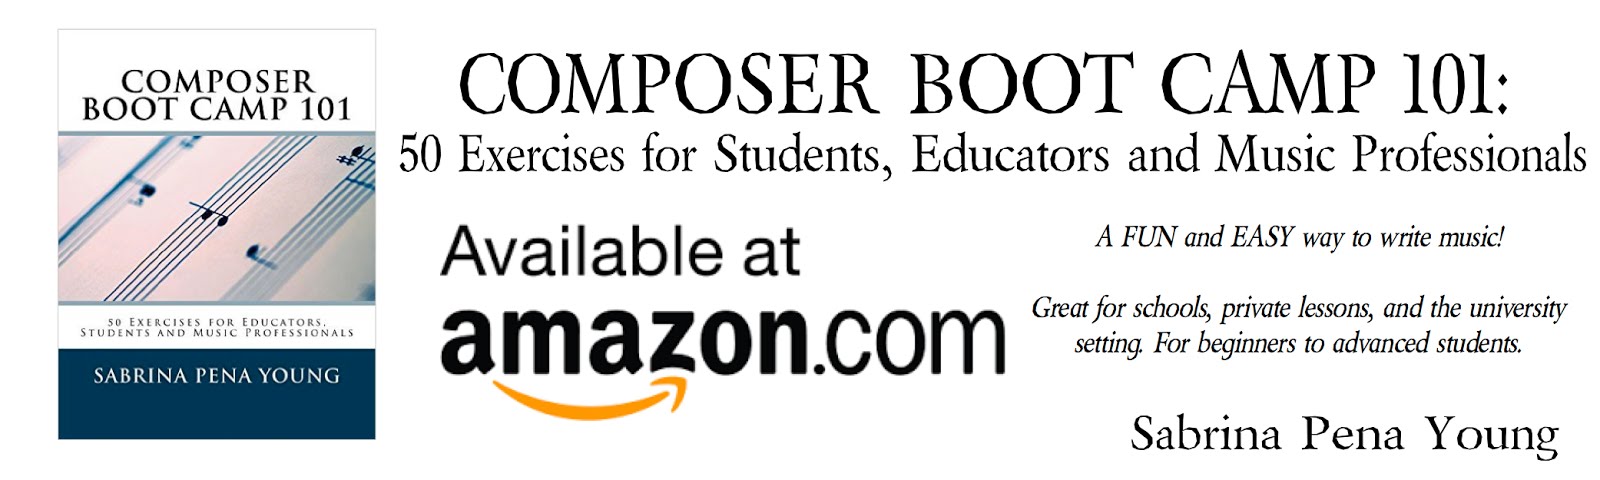 COMPOSER BOOT CAMP